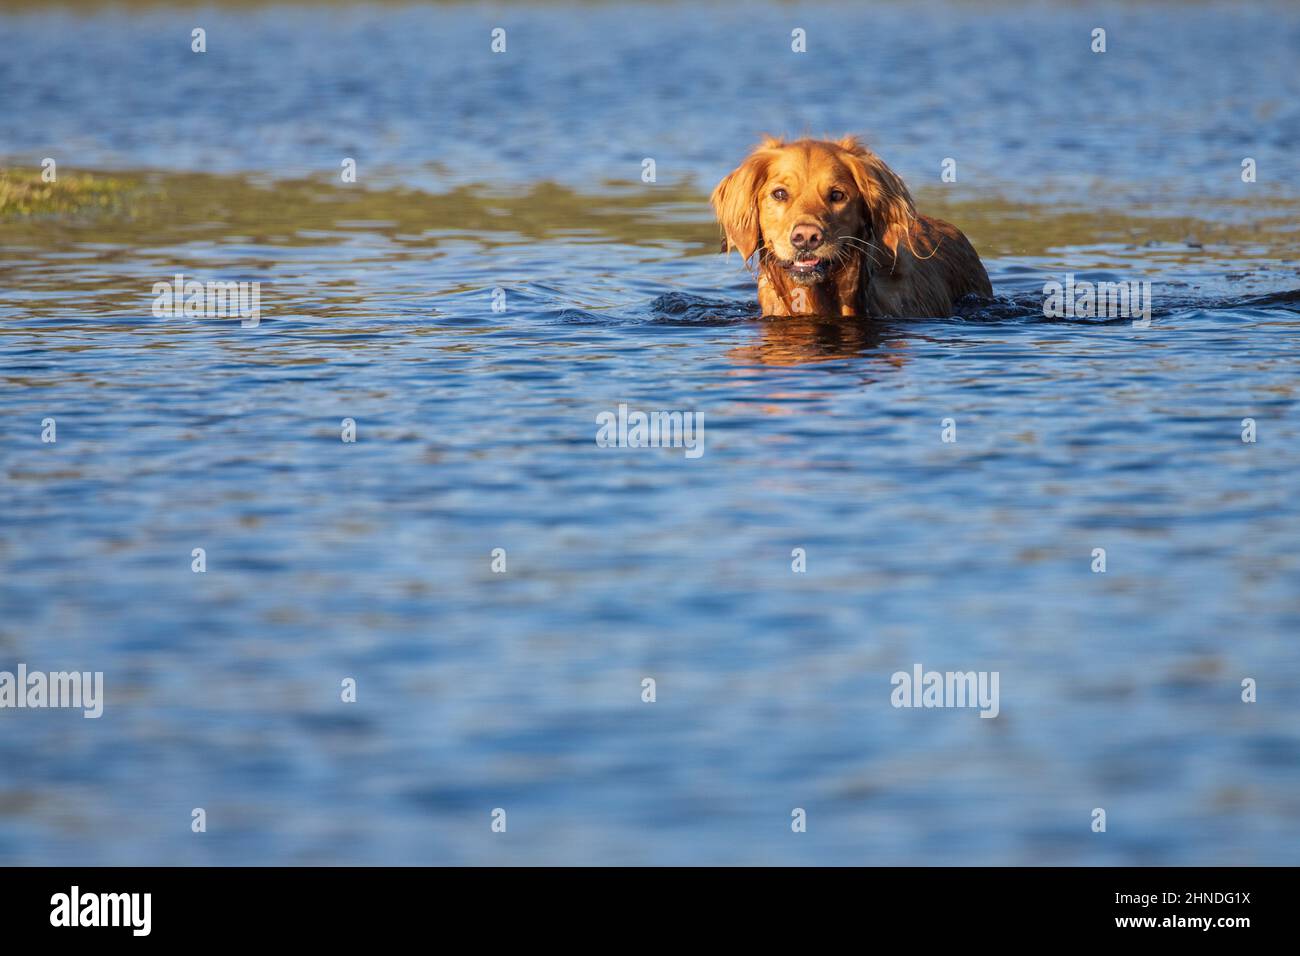 Golden Retriever wading in a pond looking at camera.  Photographed in Shasta County, California, USA. Stock Photo